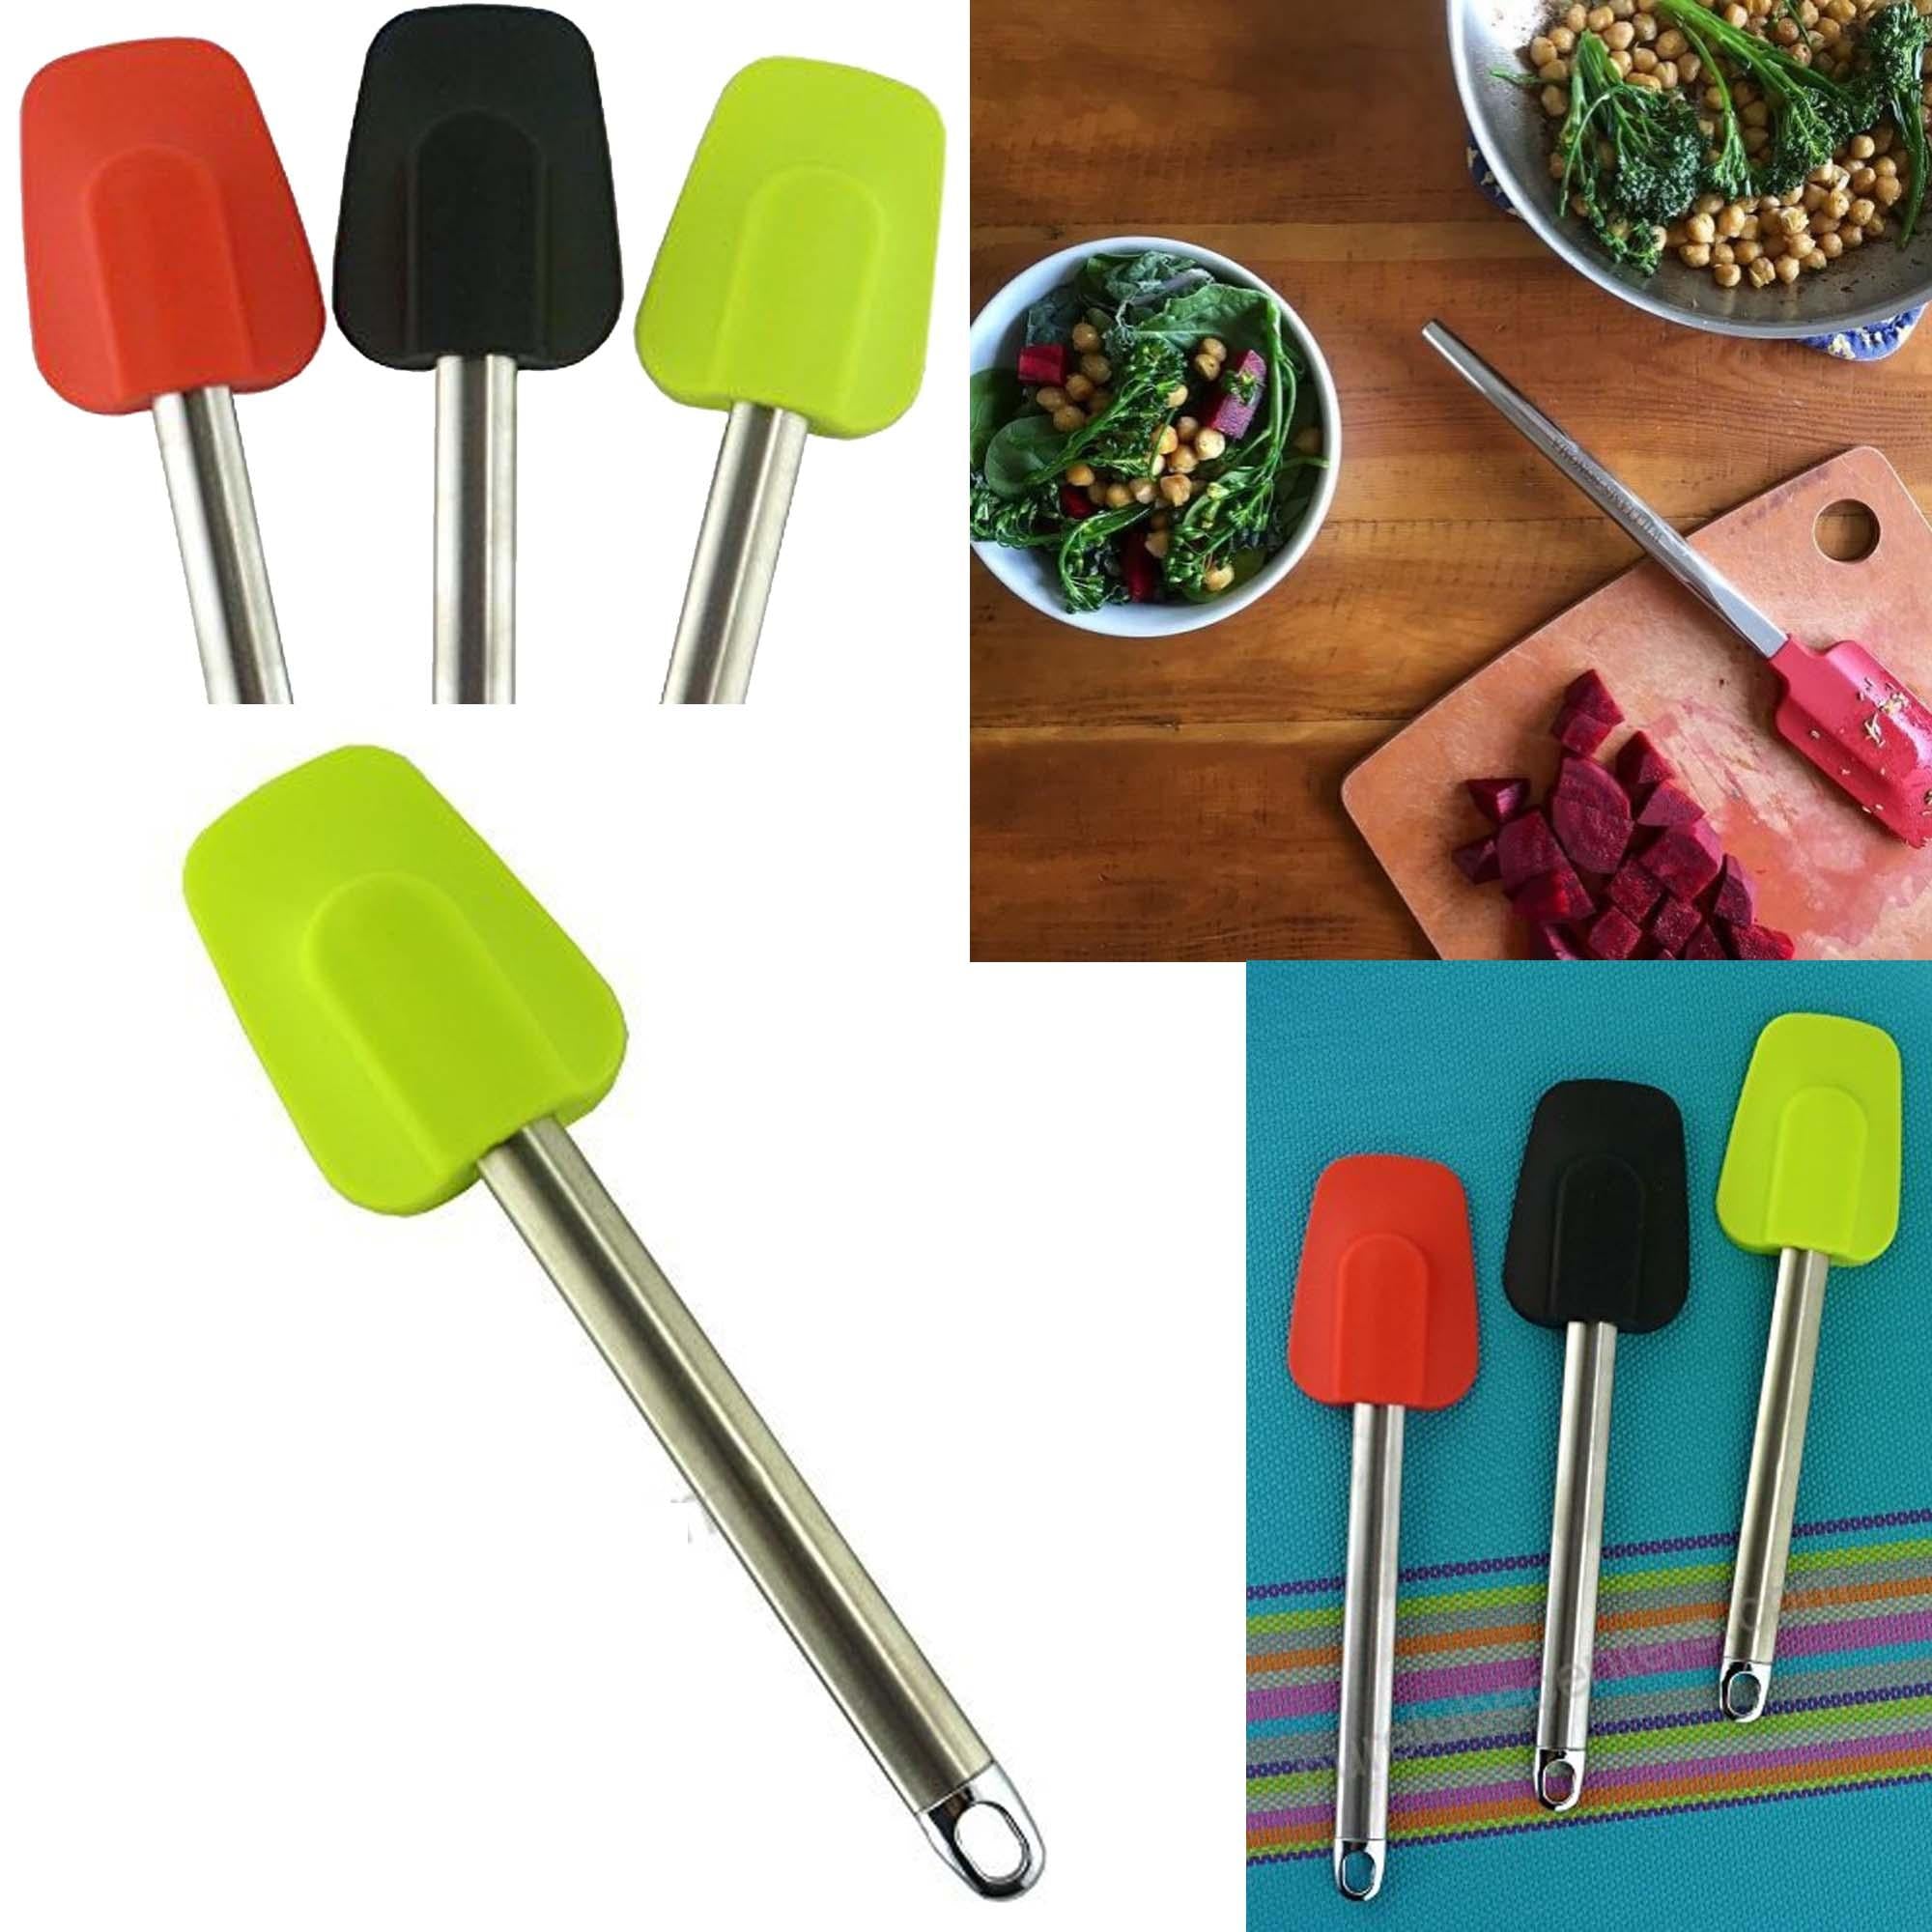 Spatula with a Steel Handle